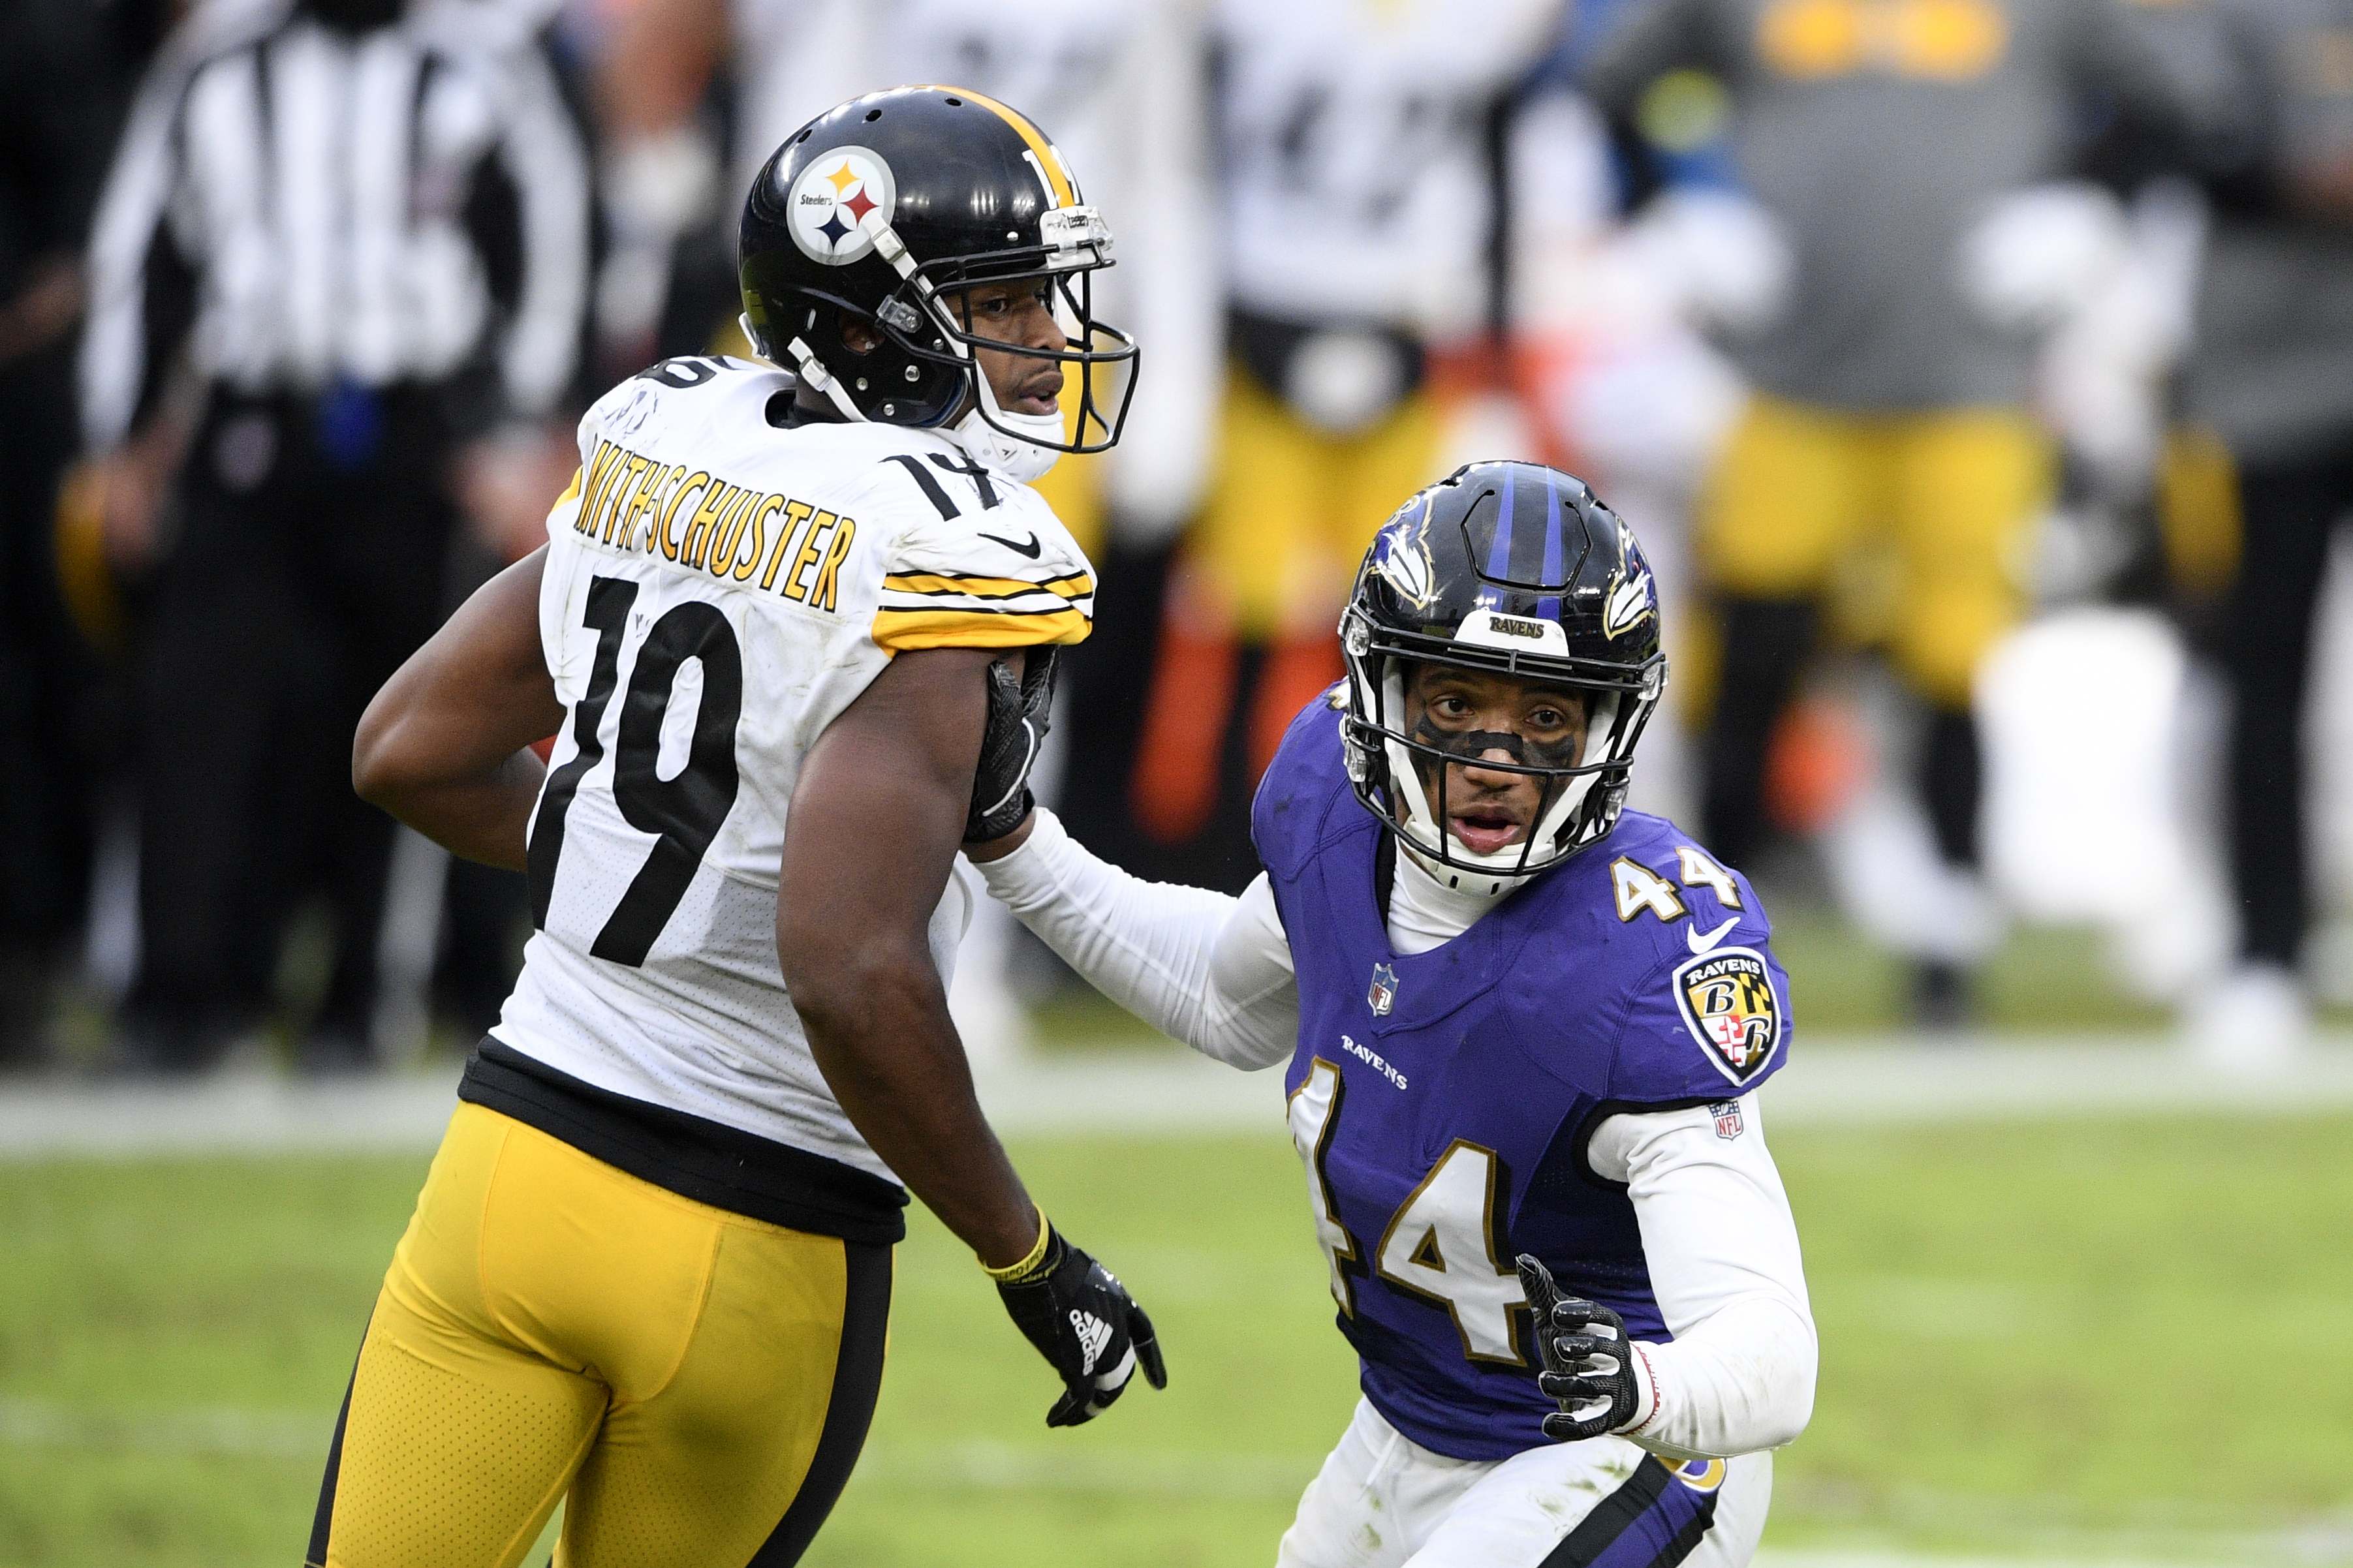 Ravens-Steelers game moved from Thursday night to Sunday on NBC